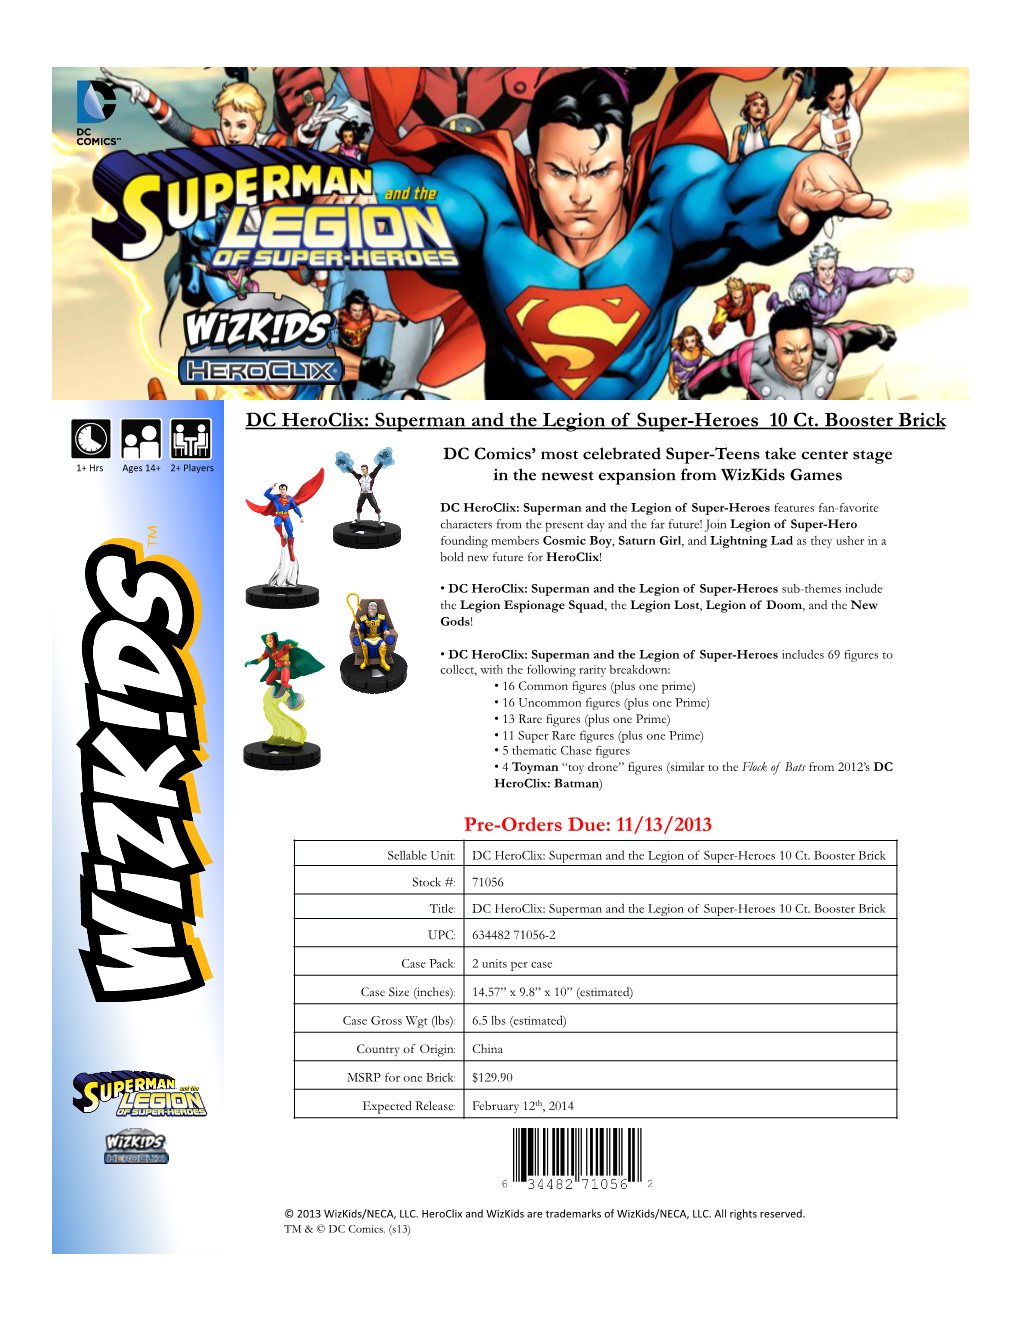 DC Heroclix: Superman and the Legion of Super-Heroes 10 Ct. Booster Brick Pre-Orders Due: 11/13/2013